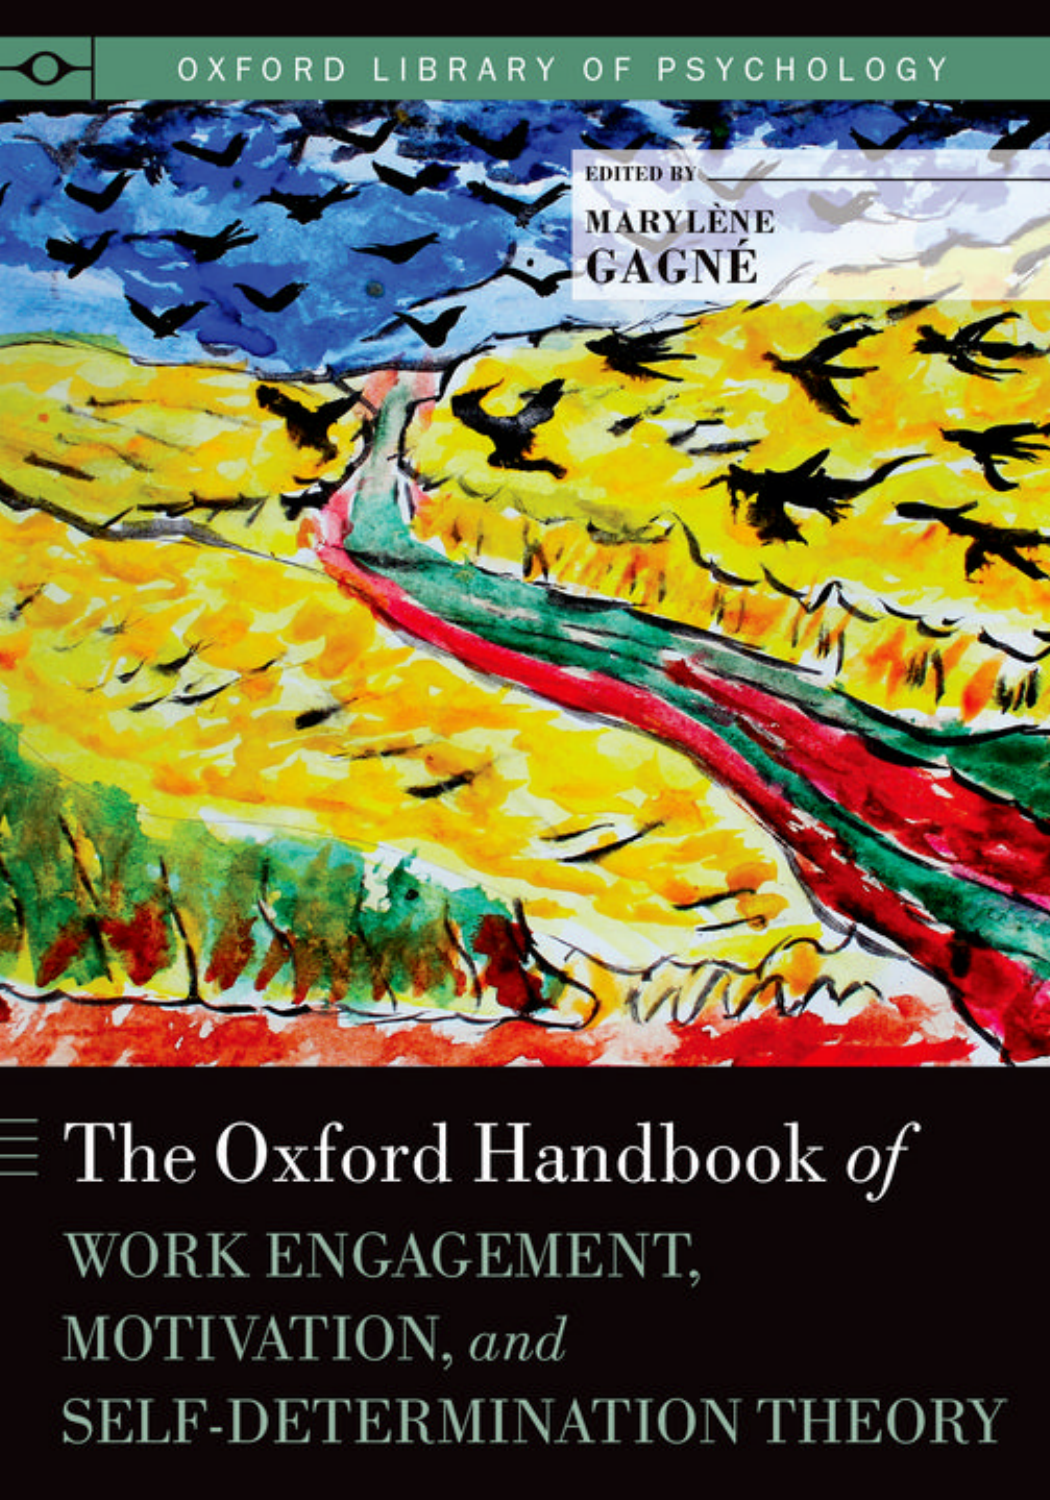 The Oxford Handbook Of Work Engagement Motivation And Self-determination Theory Pdfdrive